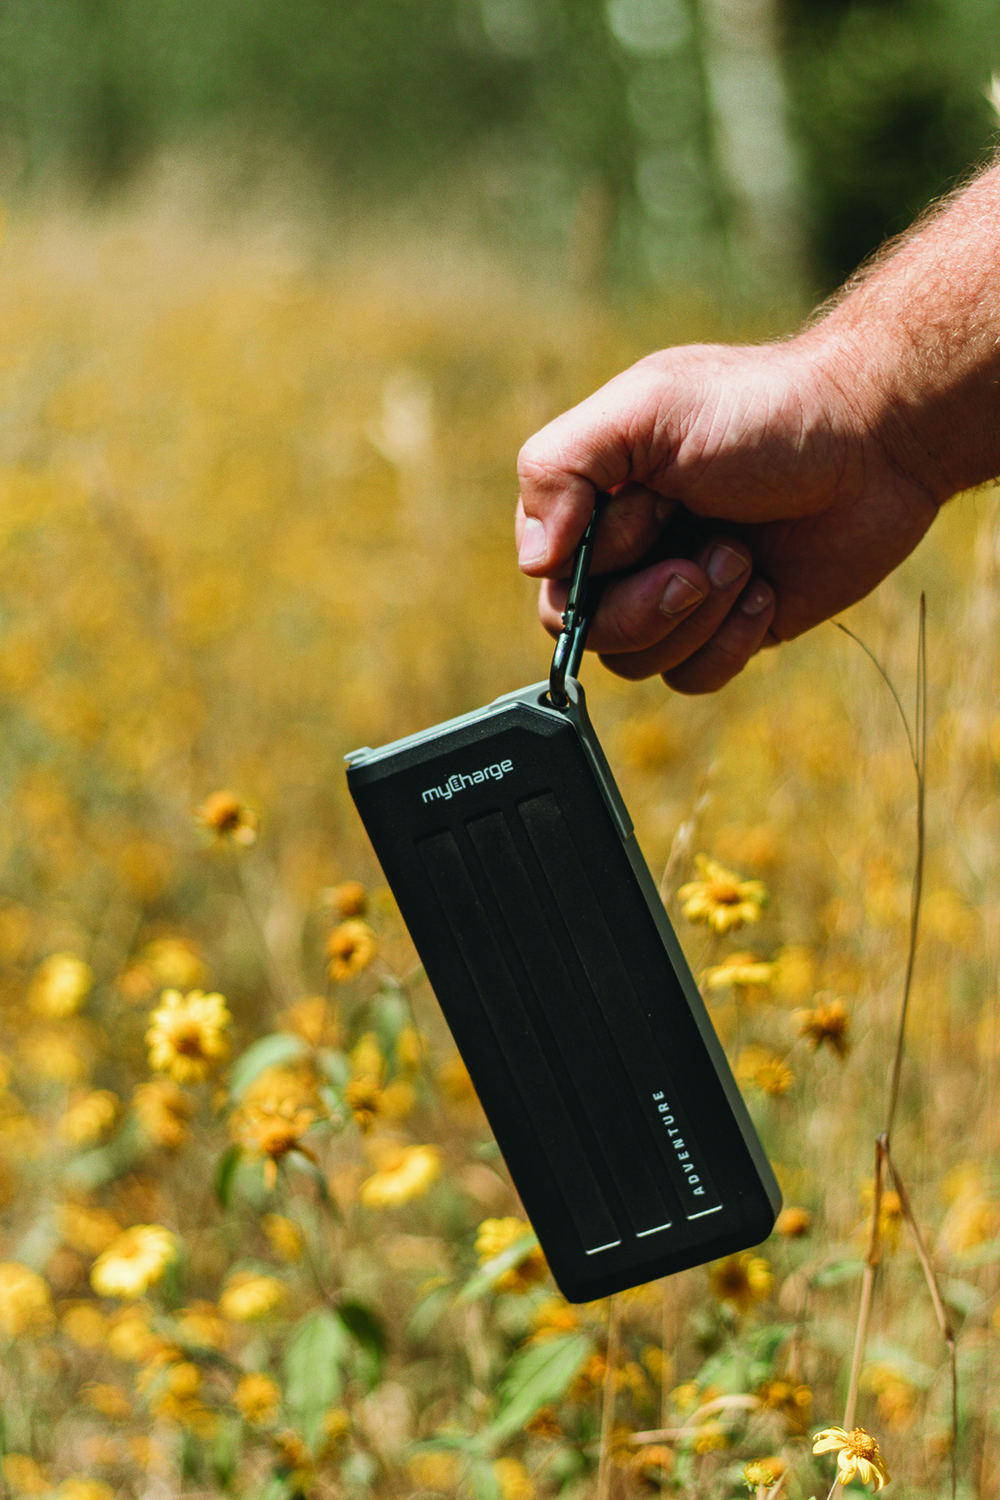 The myCharge Adventure H20 Turbo portable charger with a built-in carabiner.